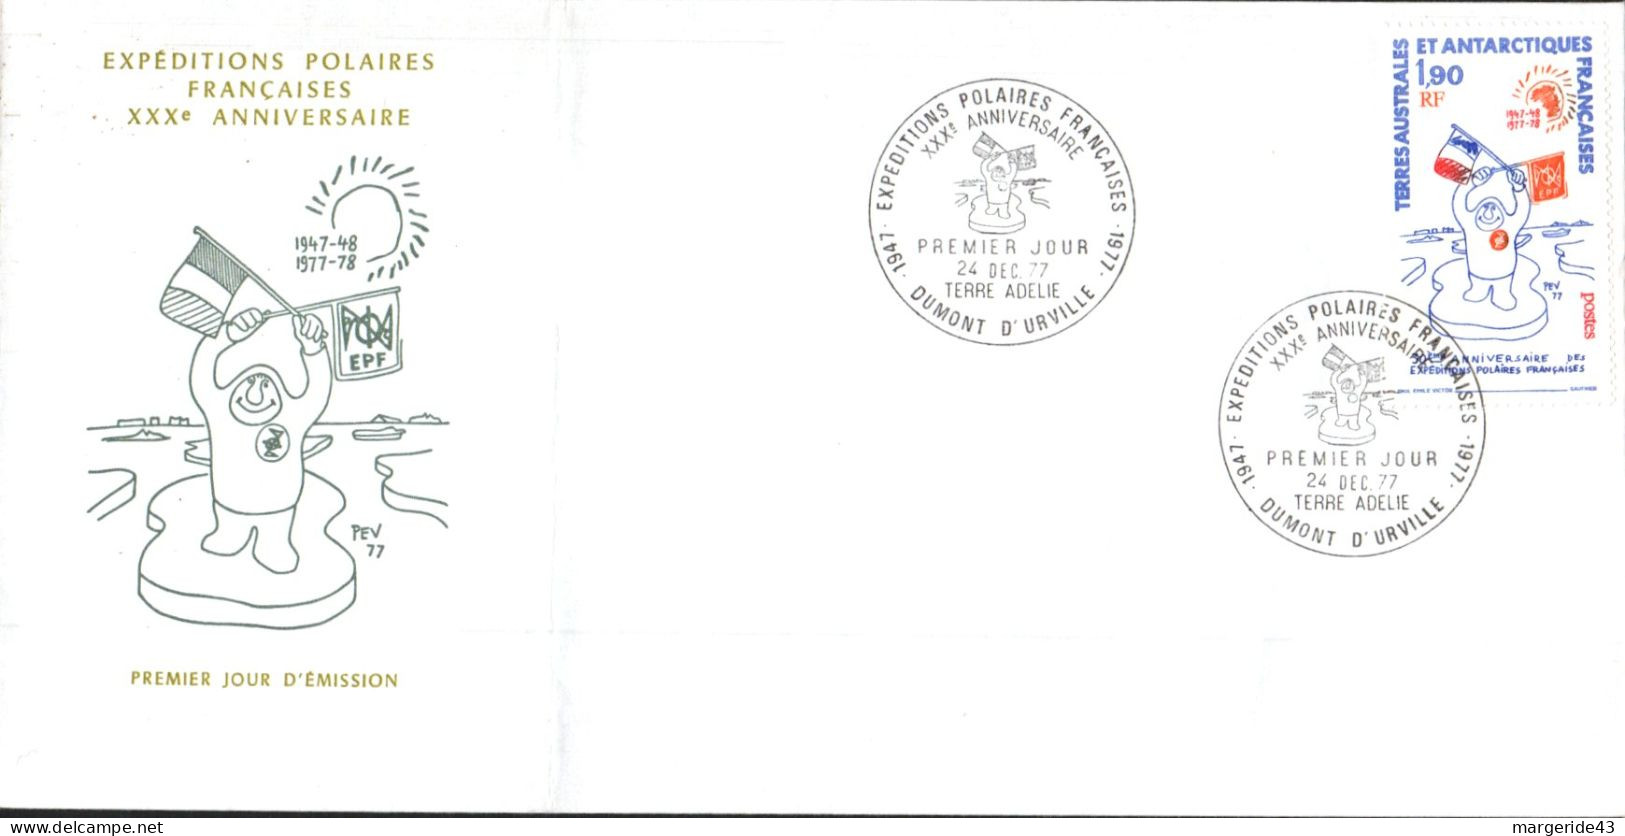 TAAF FDC 1977 30 ANS EXPEDITIONS POLAIRES FRANCAISES - FDC